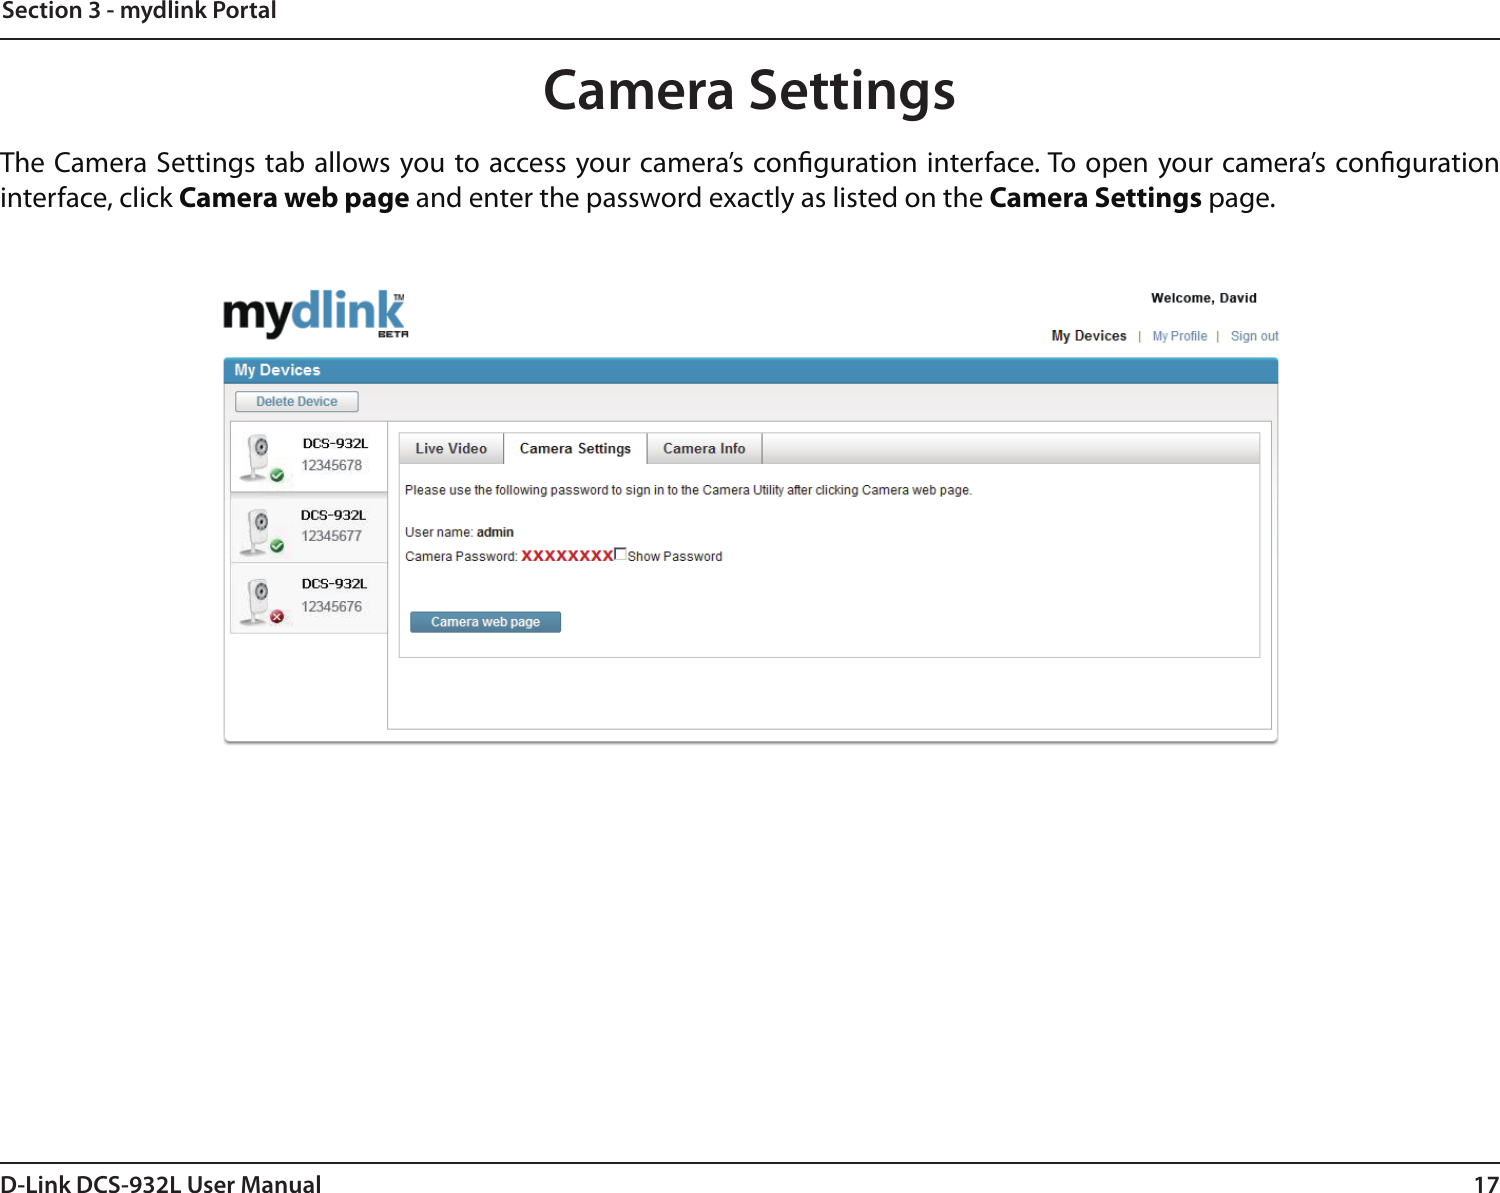 17D-Link DCS-932L User ManualSection 3 - mydlink PortalCamera SettingsThe Camera Settings tab allows you to access your camera’s conguration interface. To open your camera’s conguration interface, click Camera web page and enter the password exactly as listed on the Camera Settings page.